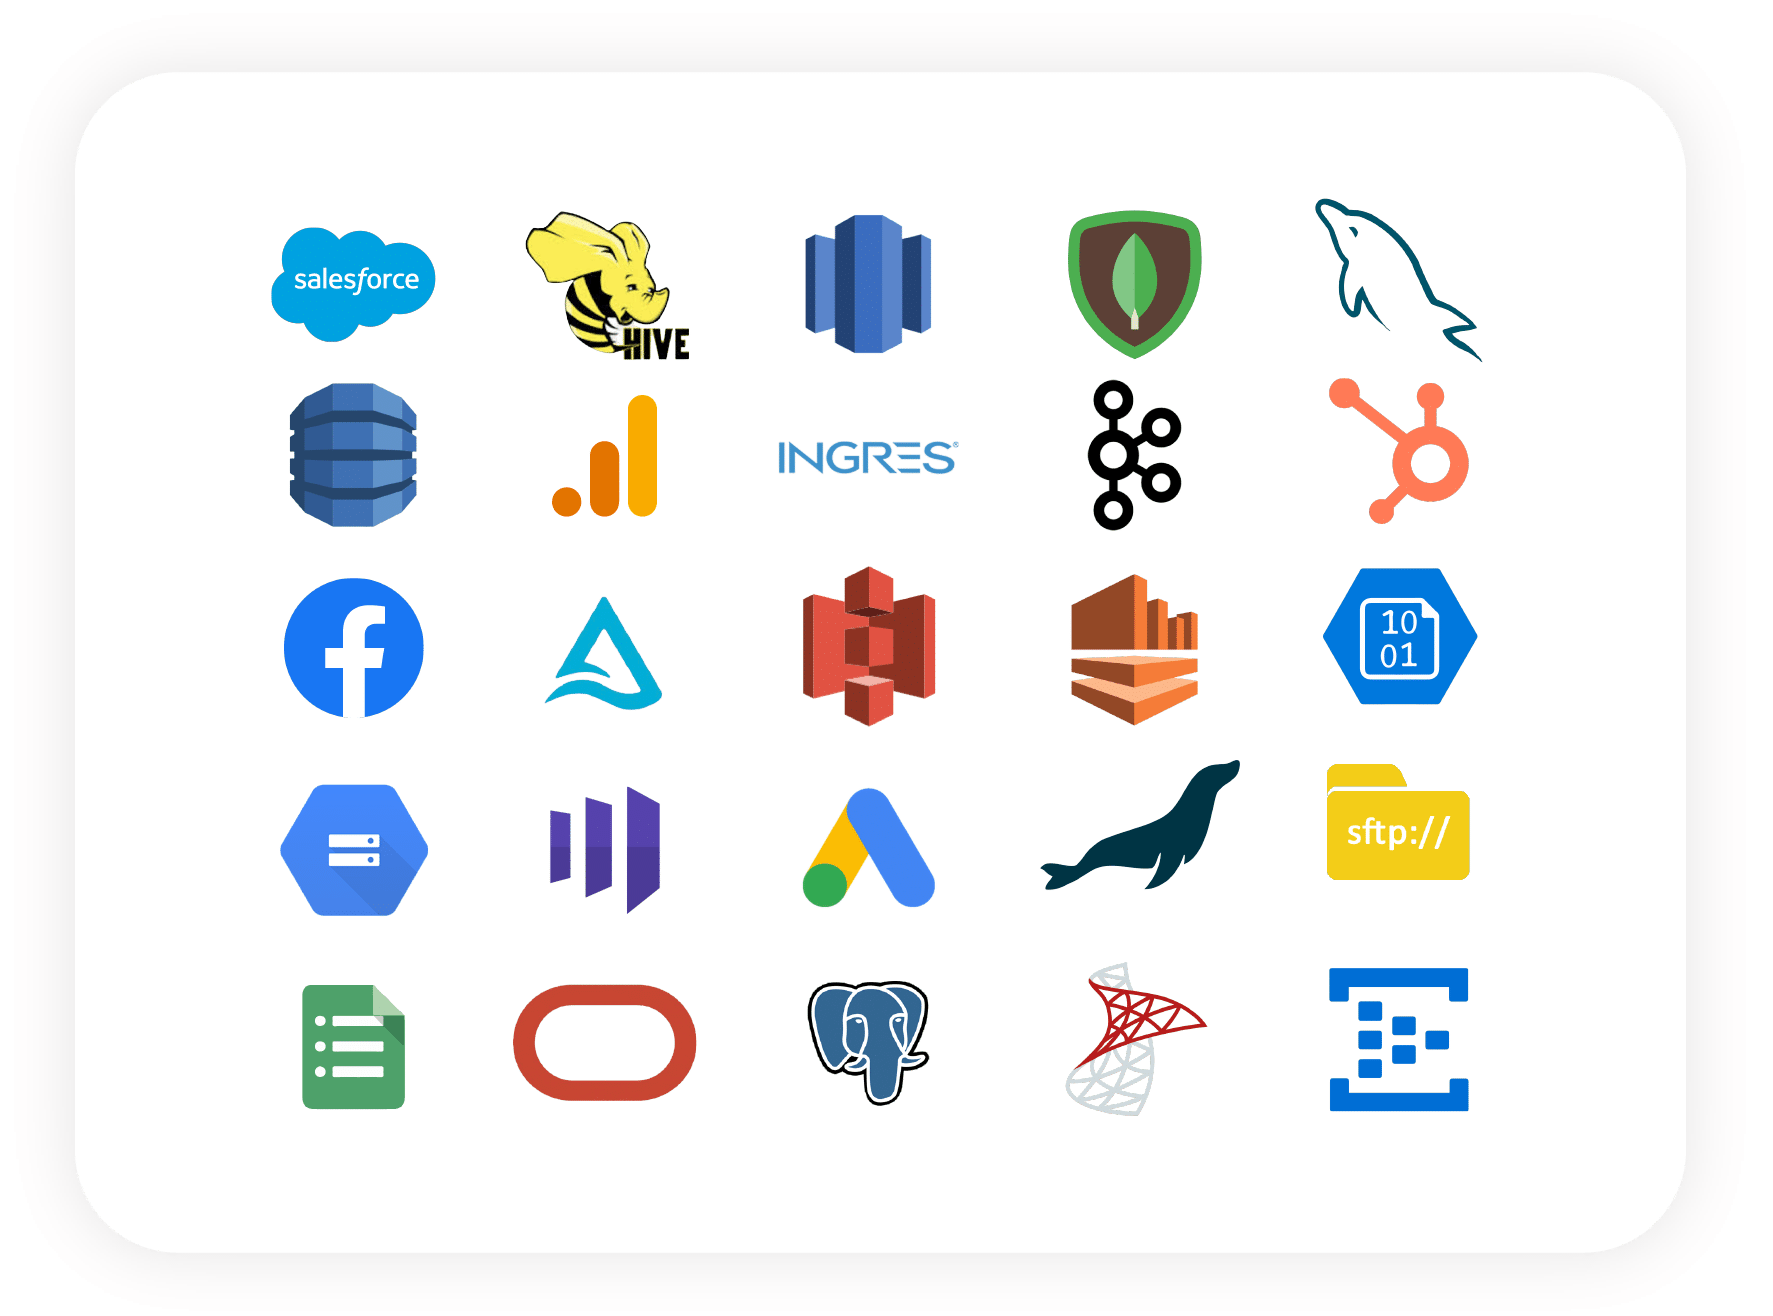 Collection of data sources Ascend has connectors for to ingest data and build end-to-end data pipelines on the platform.